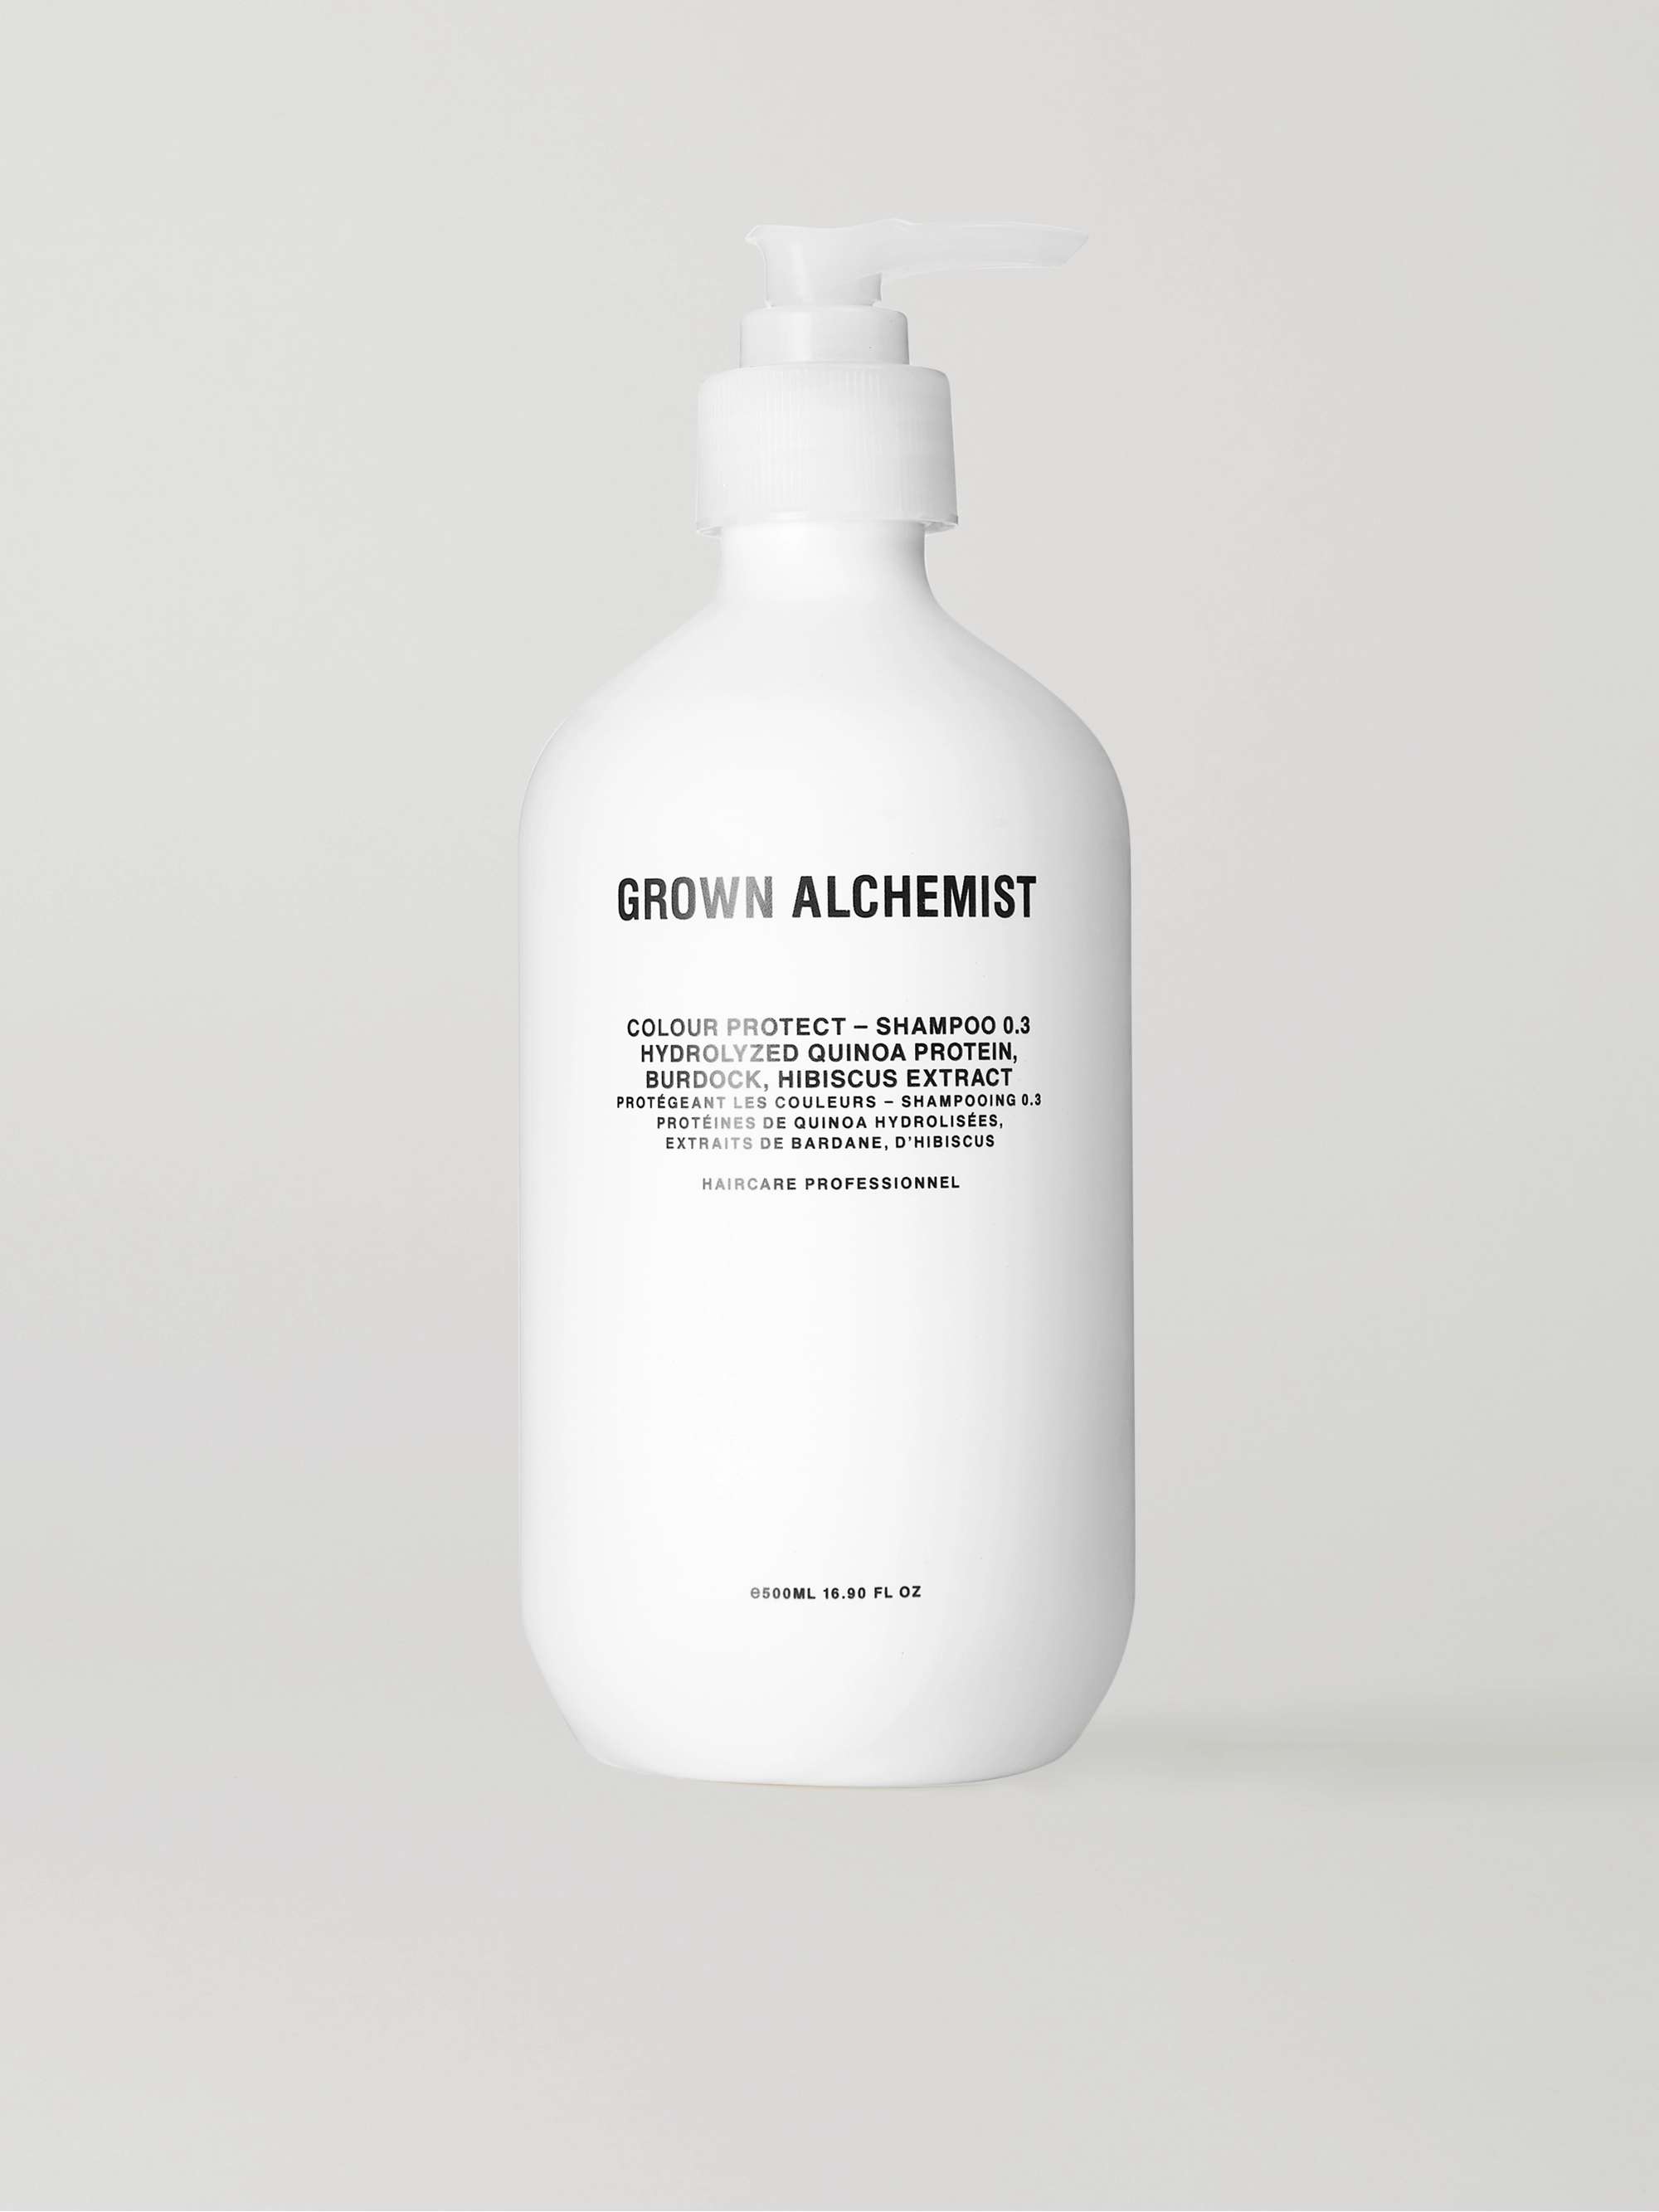 GROWN ALCHEMIST Colour Protect Shampoo 0.3 -  Hydrolyzed Quinoa Protein, Burdock and Hibiscus Extract, 500ml